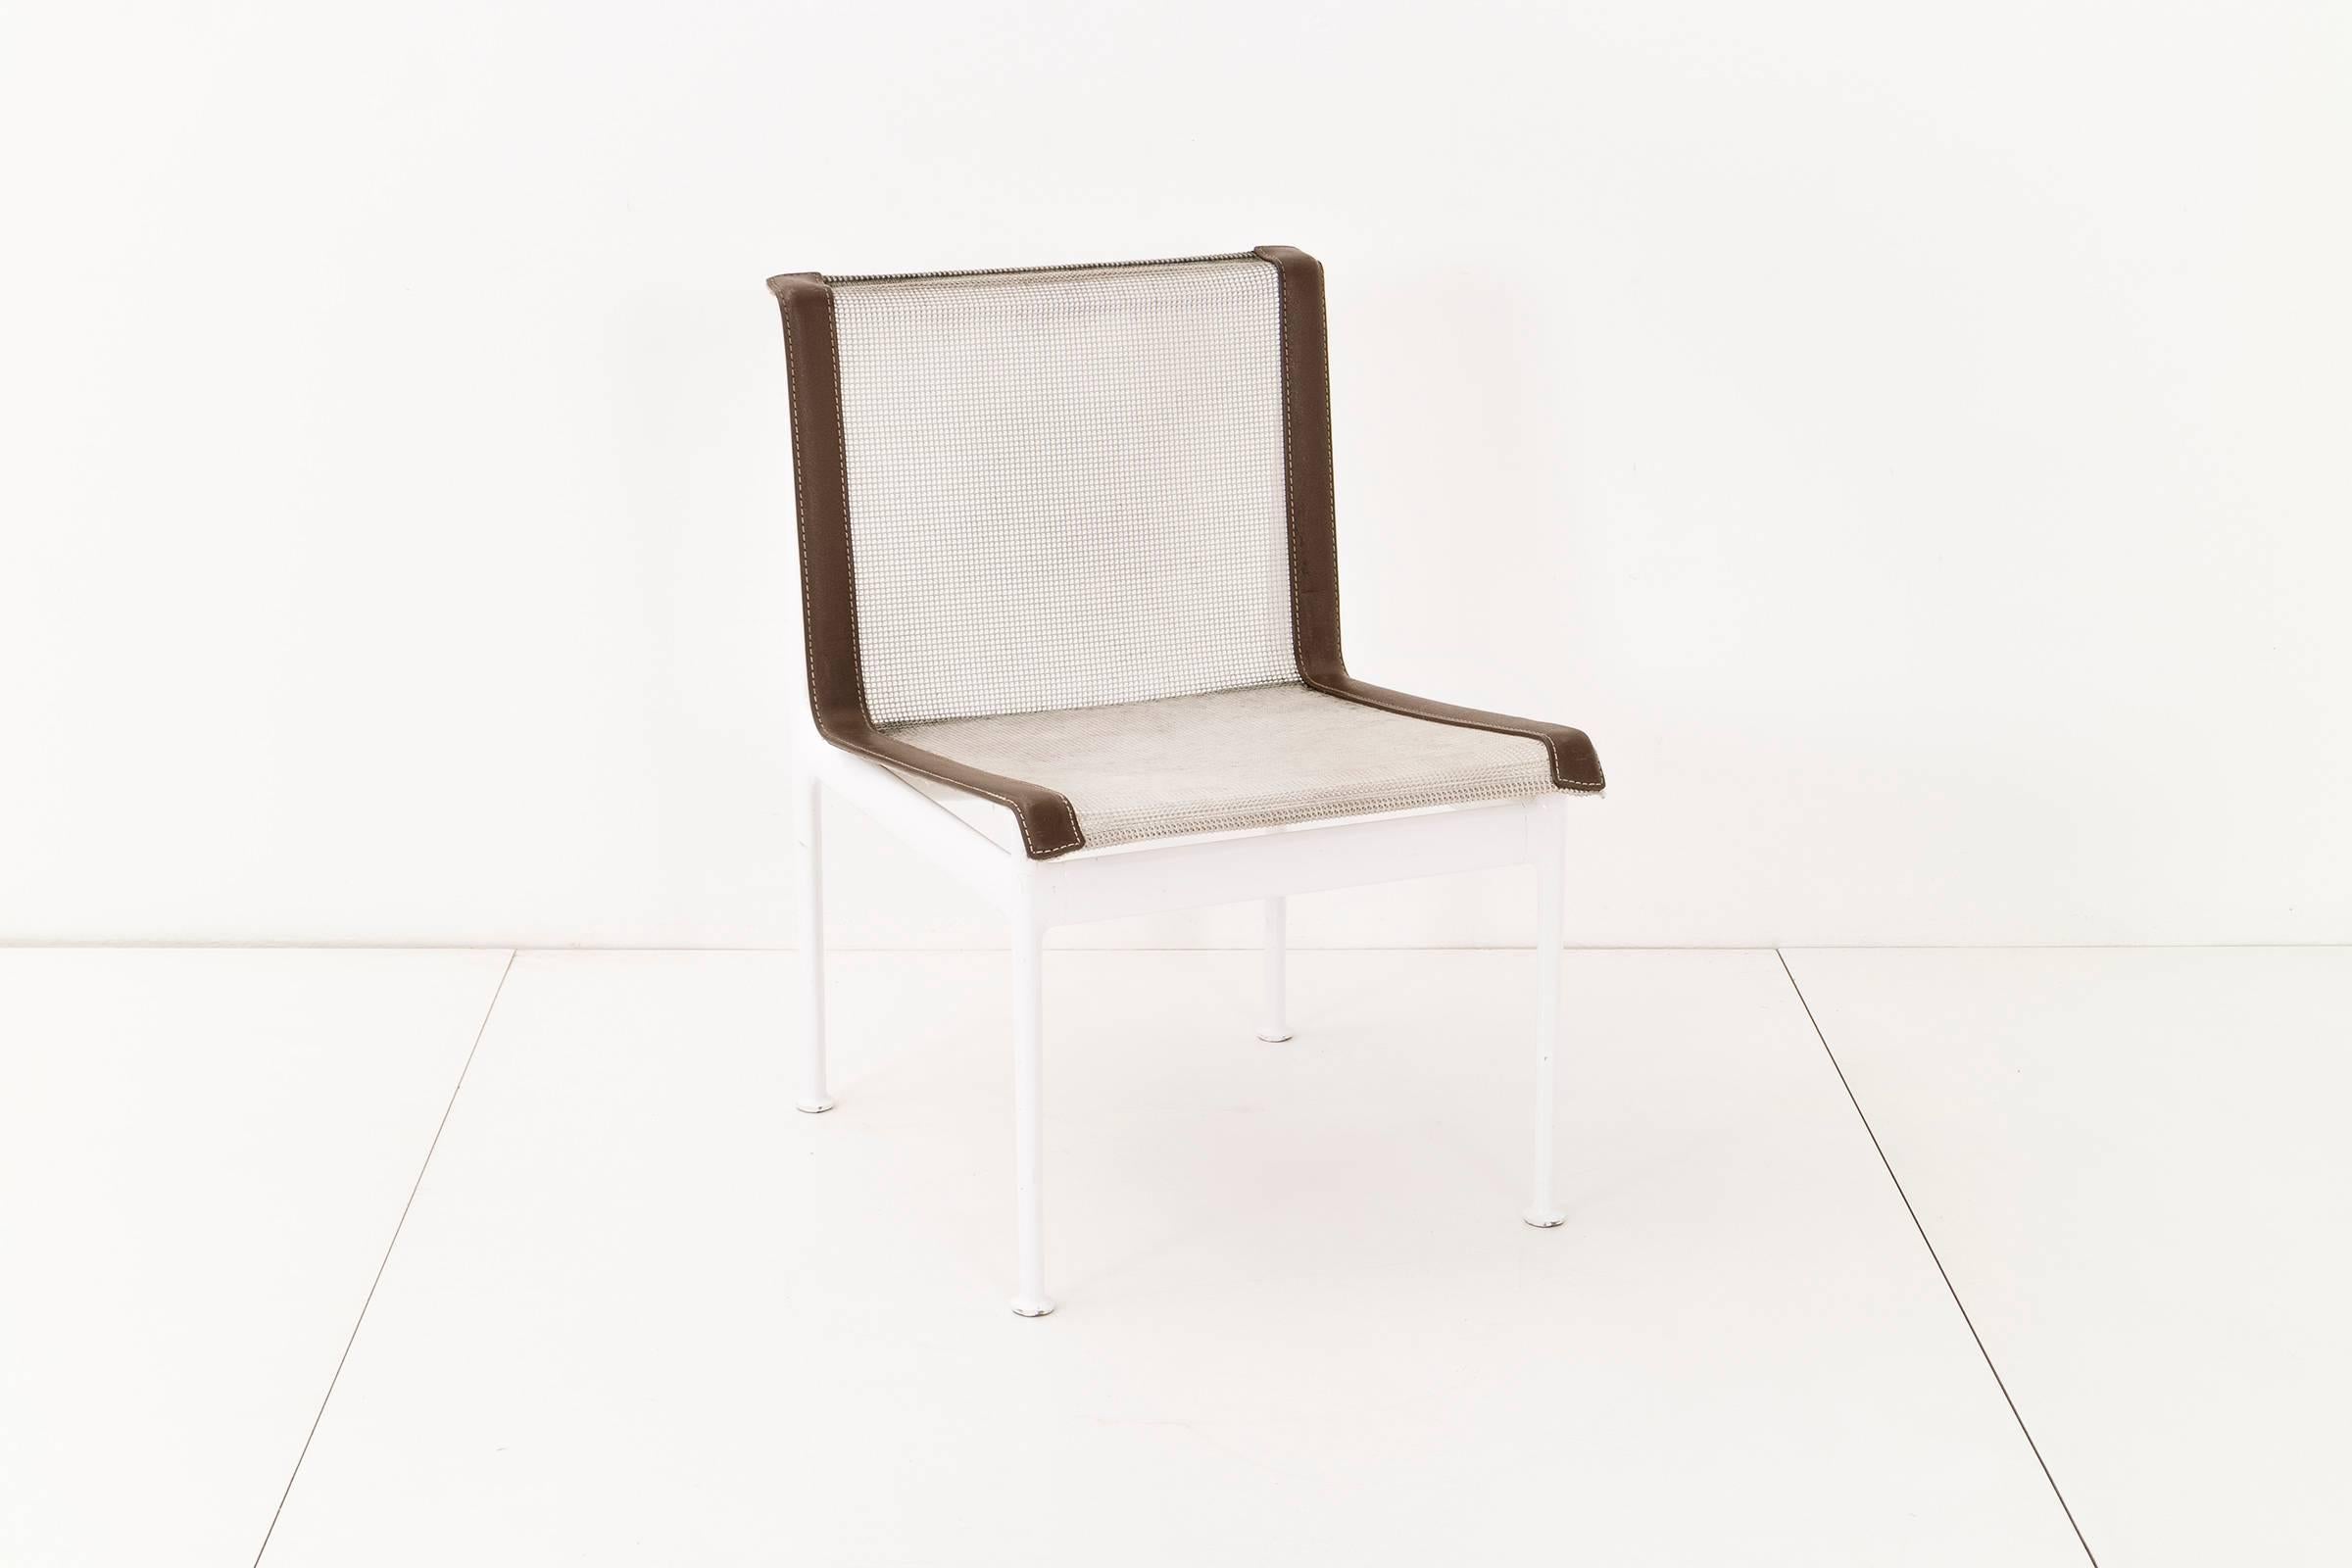 Richard Schultz 1966 series Knoll. Set of four outdoor dining chairs Model No. 1966-46-H. Seat and back are woven vinyl coated polyester mesh with vinyl straps and stainless steel support and connects. The frame is cast and extruded aluminium with a